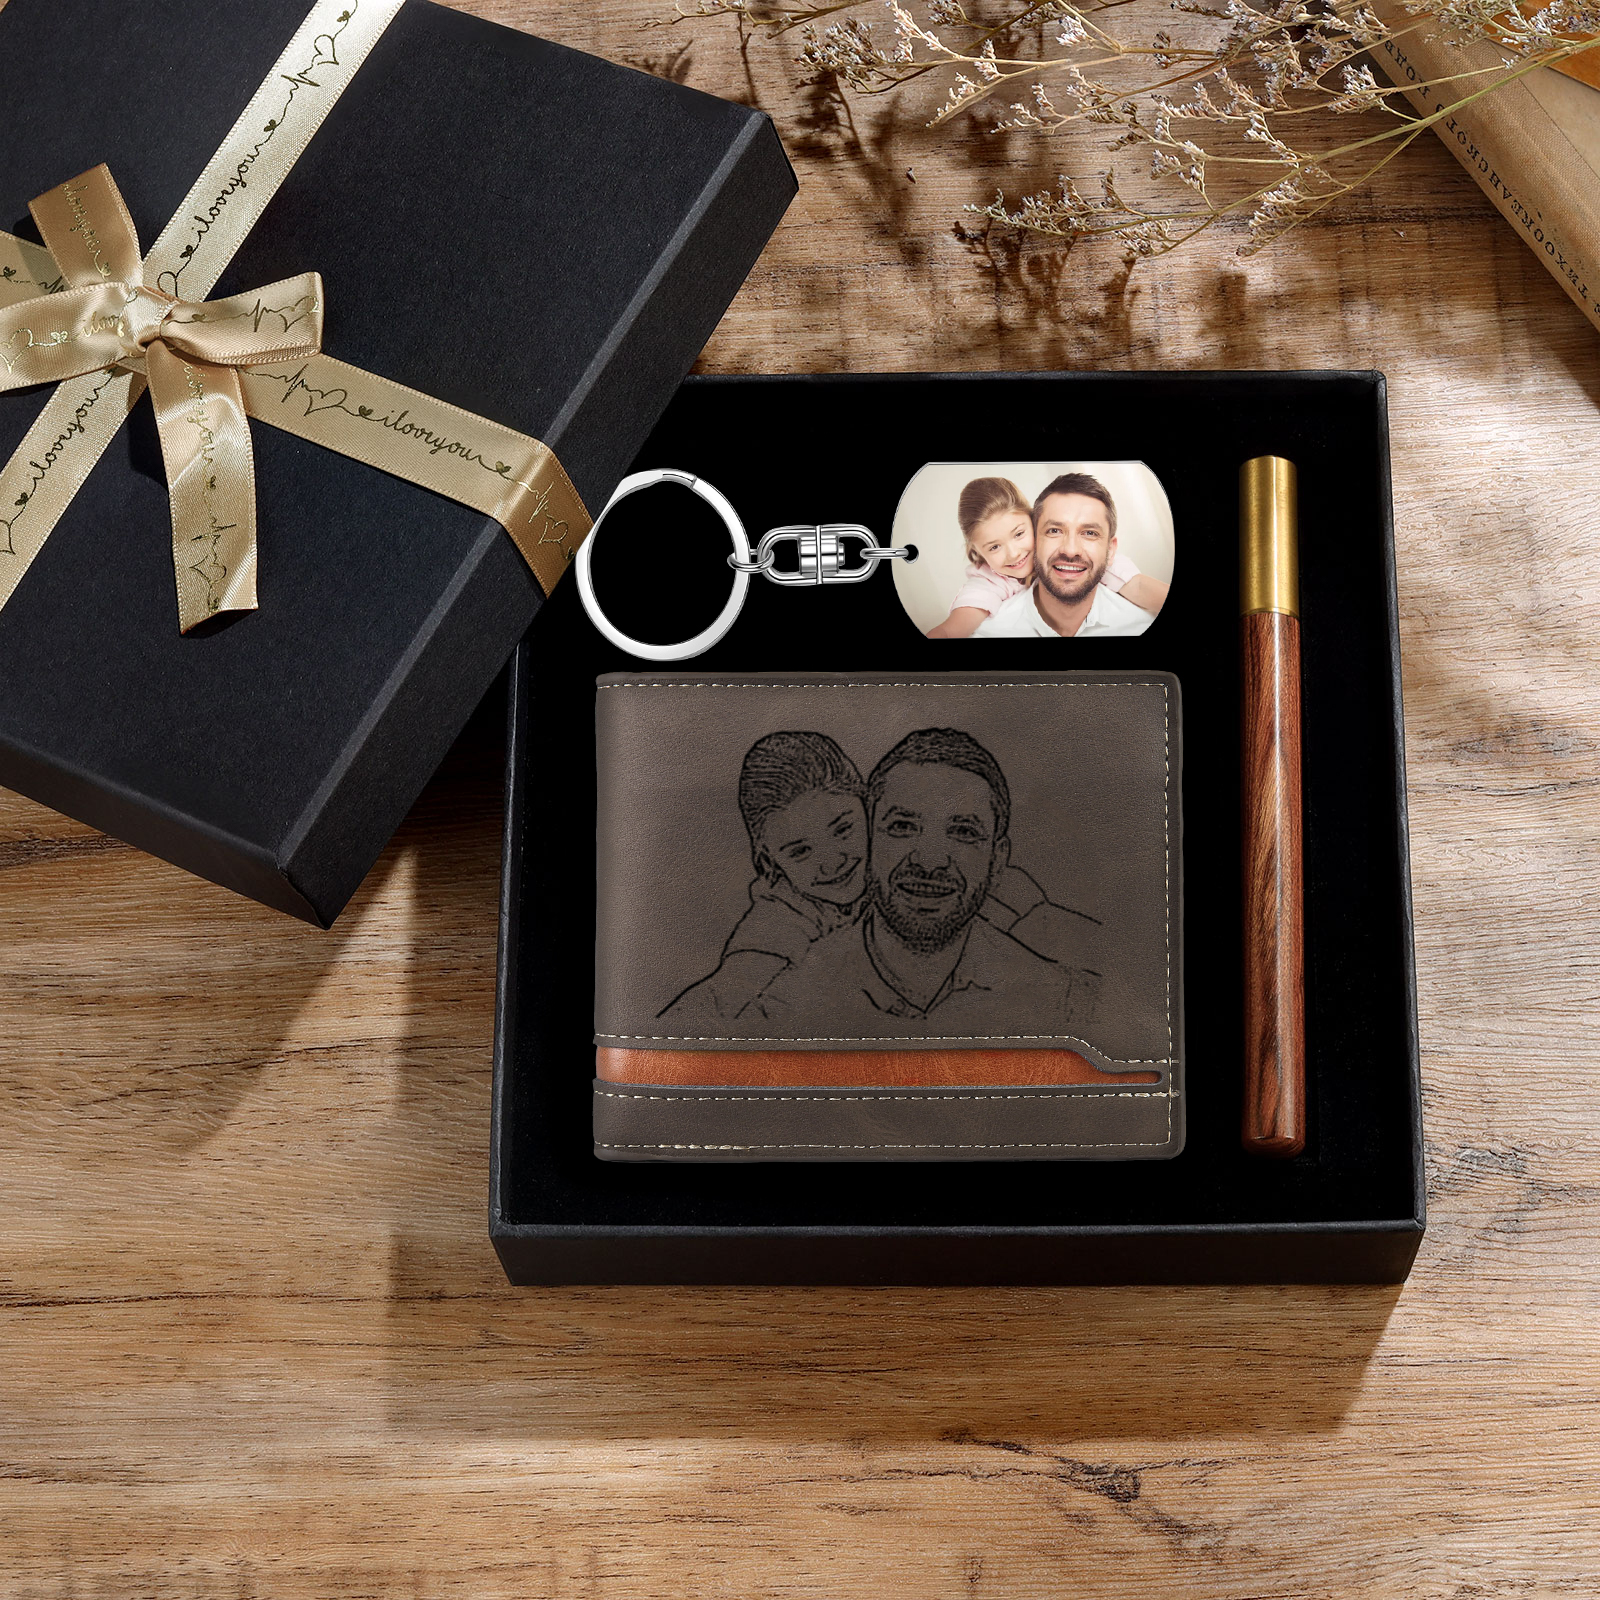 Personalized Leather Wallet Gift Box Set Keychain Strap Customizable 2 Photos 1 Letter and 1 Text Gift for Dad